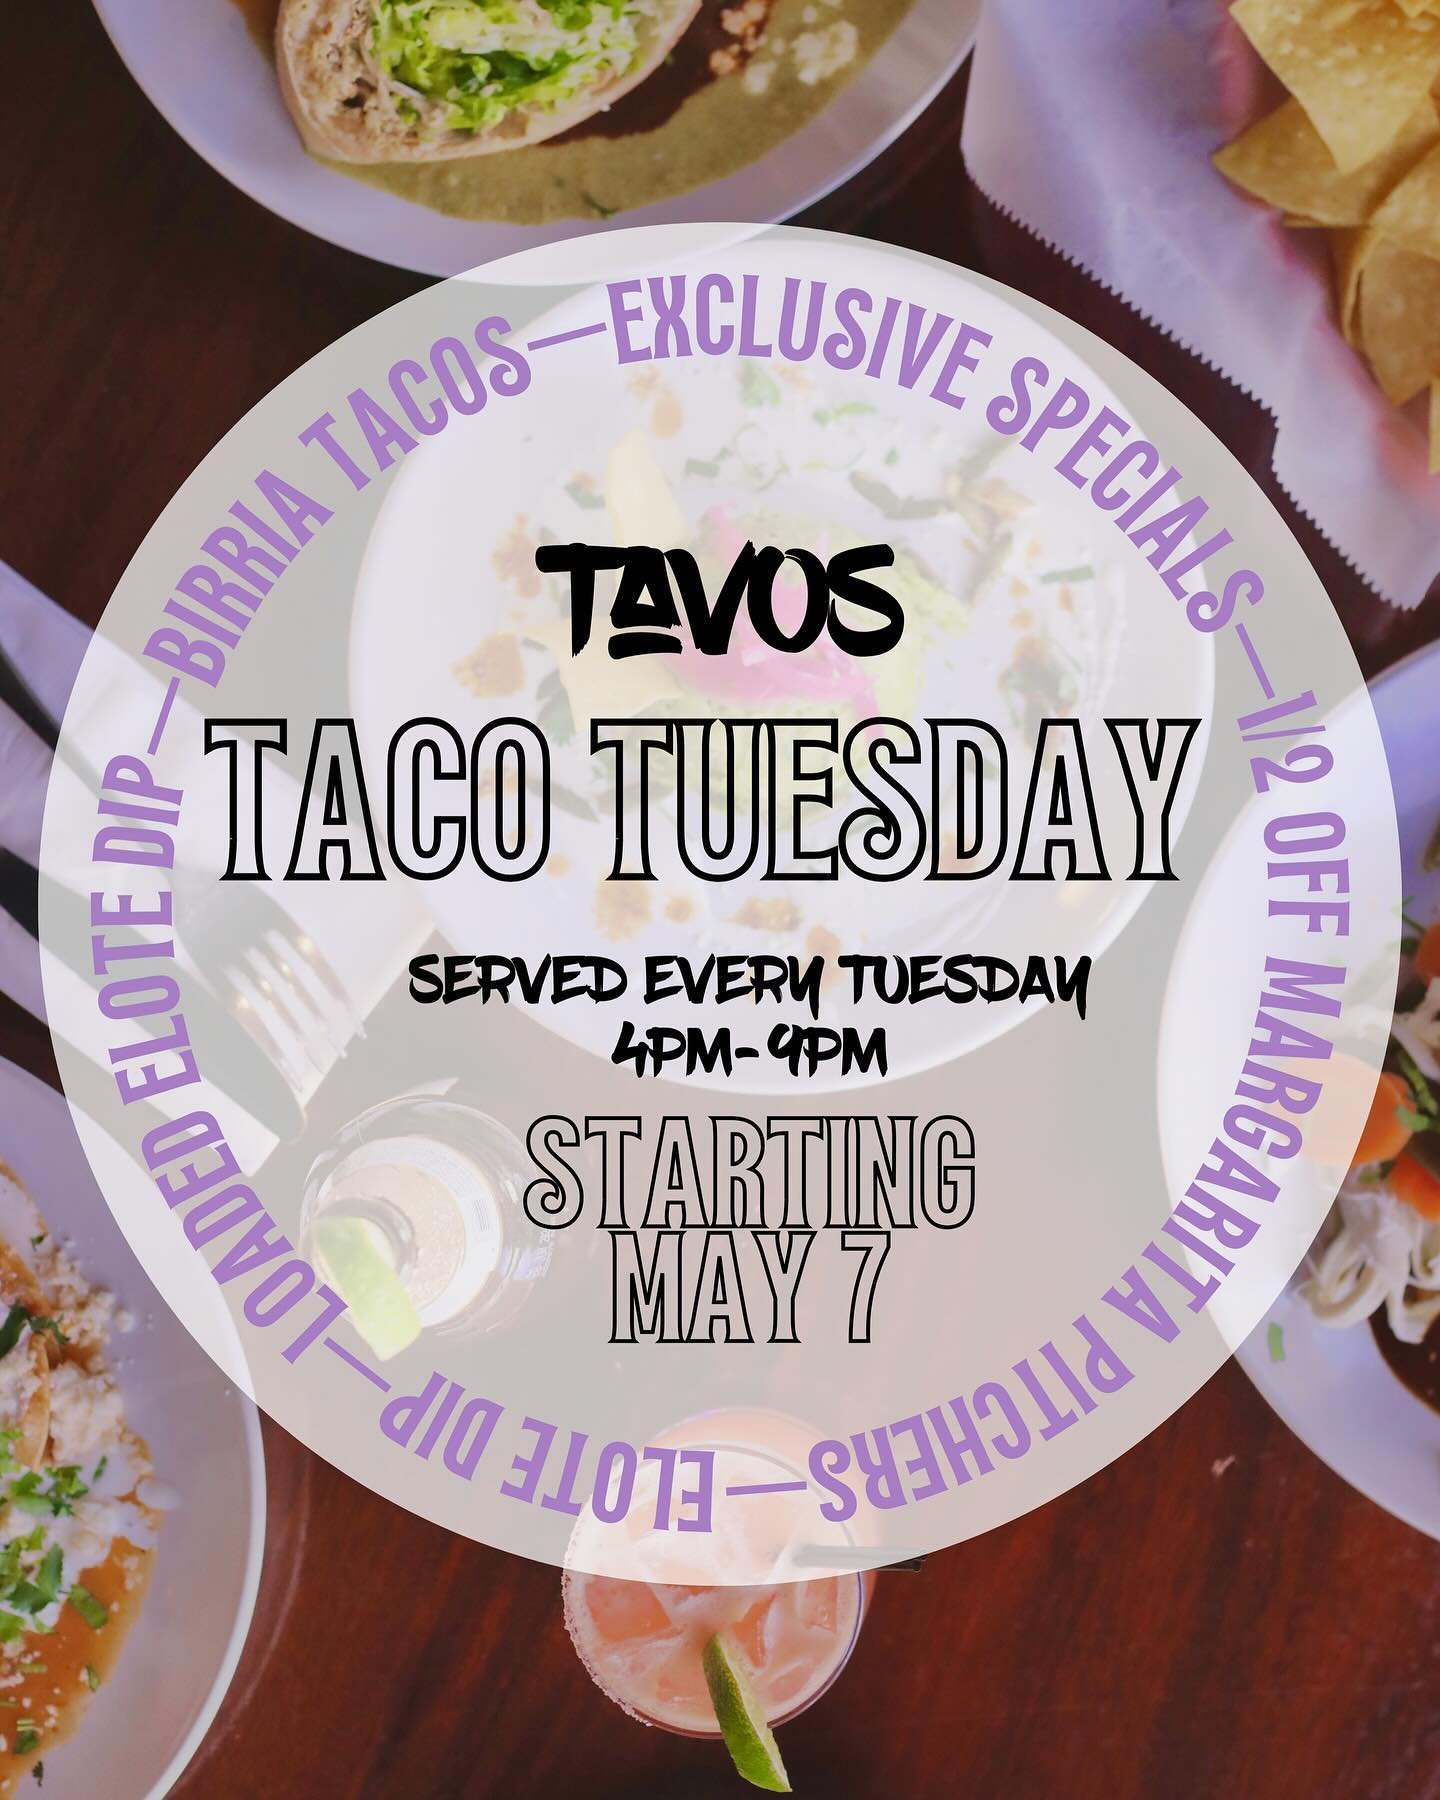 🍳 Who&rsquo;s joining us tomorrow for a scrumptious Brunch and/or a tantalizing Taco Tuesday? 🌮 Dive into our hearty Huevos Rancheros for brunch or indulge in our mouthwatering Birria Tacos for Taco Tuesday! Whichever you choose, it&rsquo;s sure to